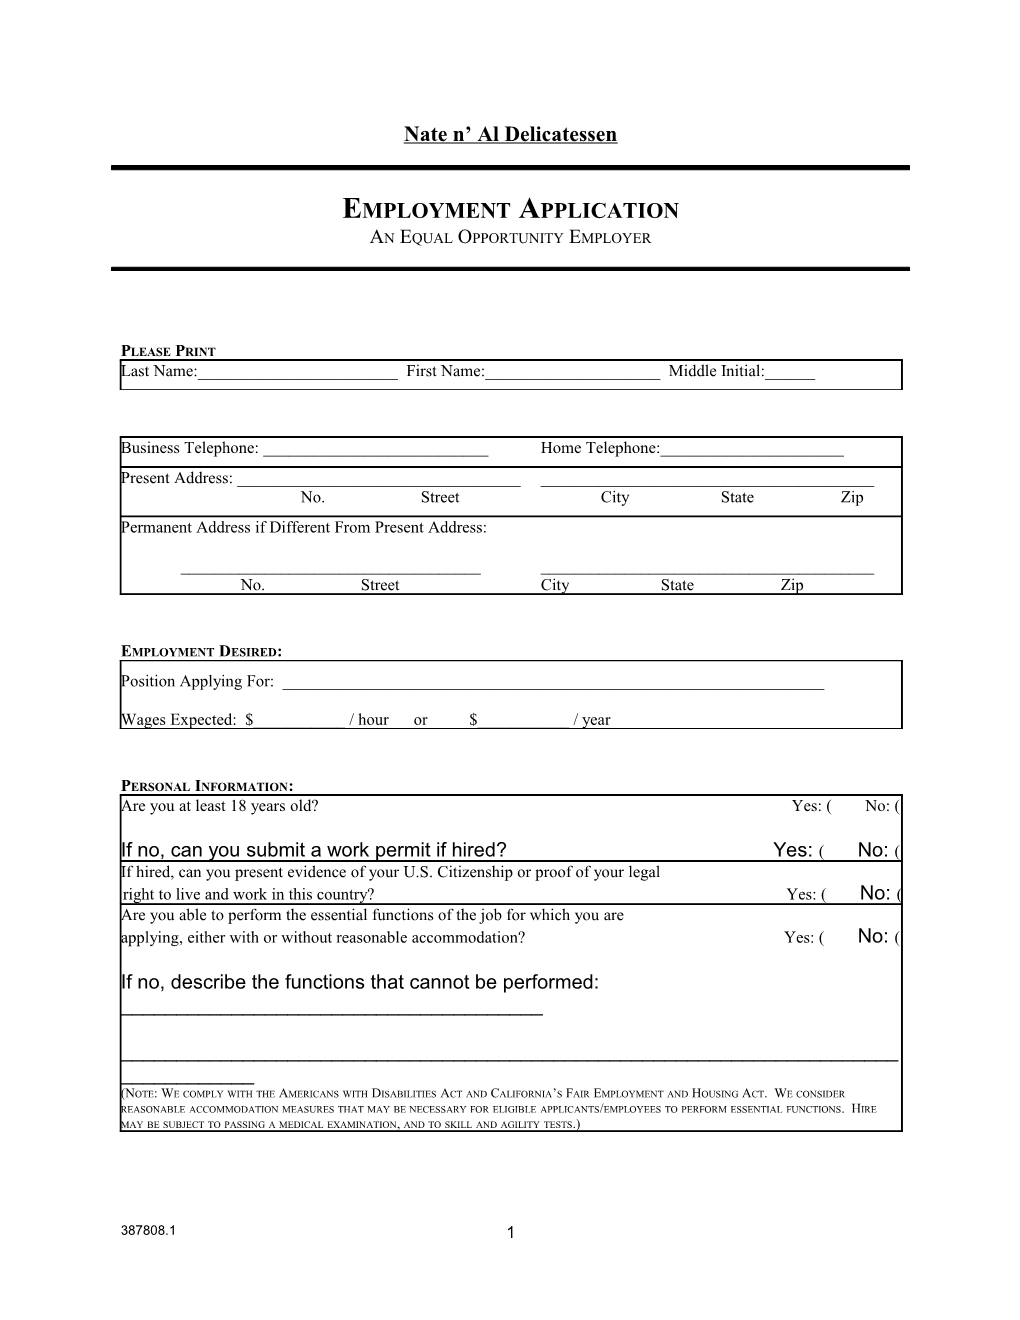 Sample Employment Forms and Agreements